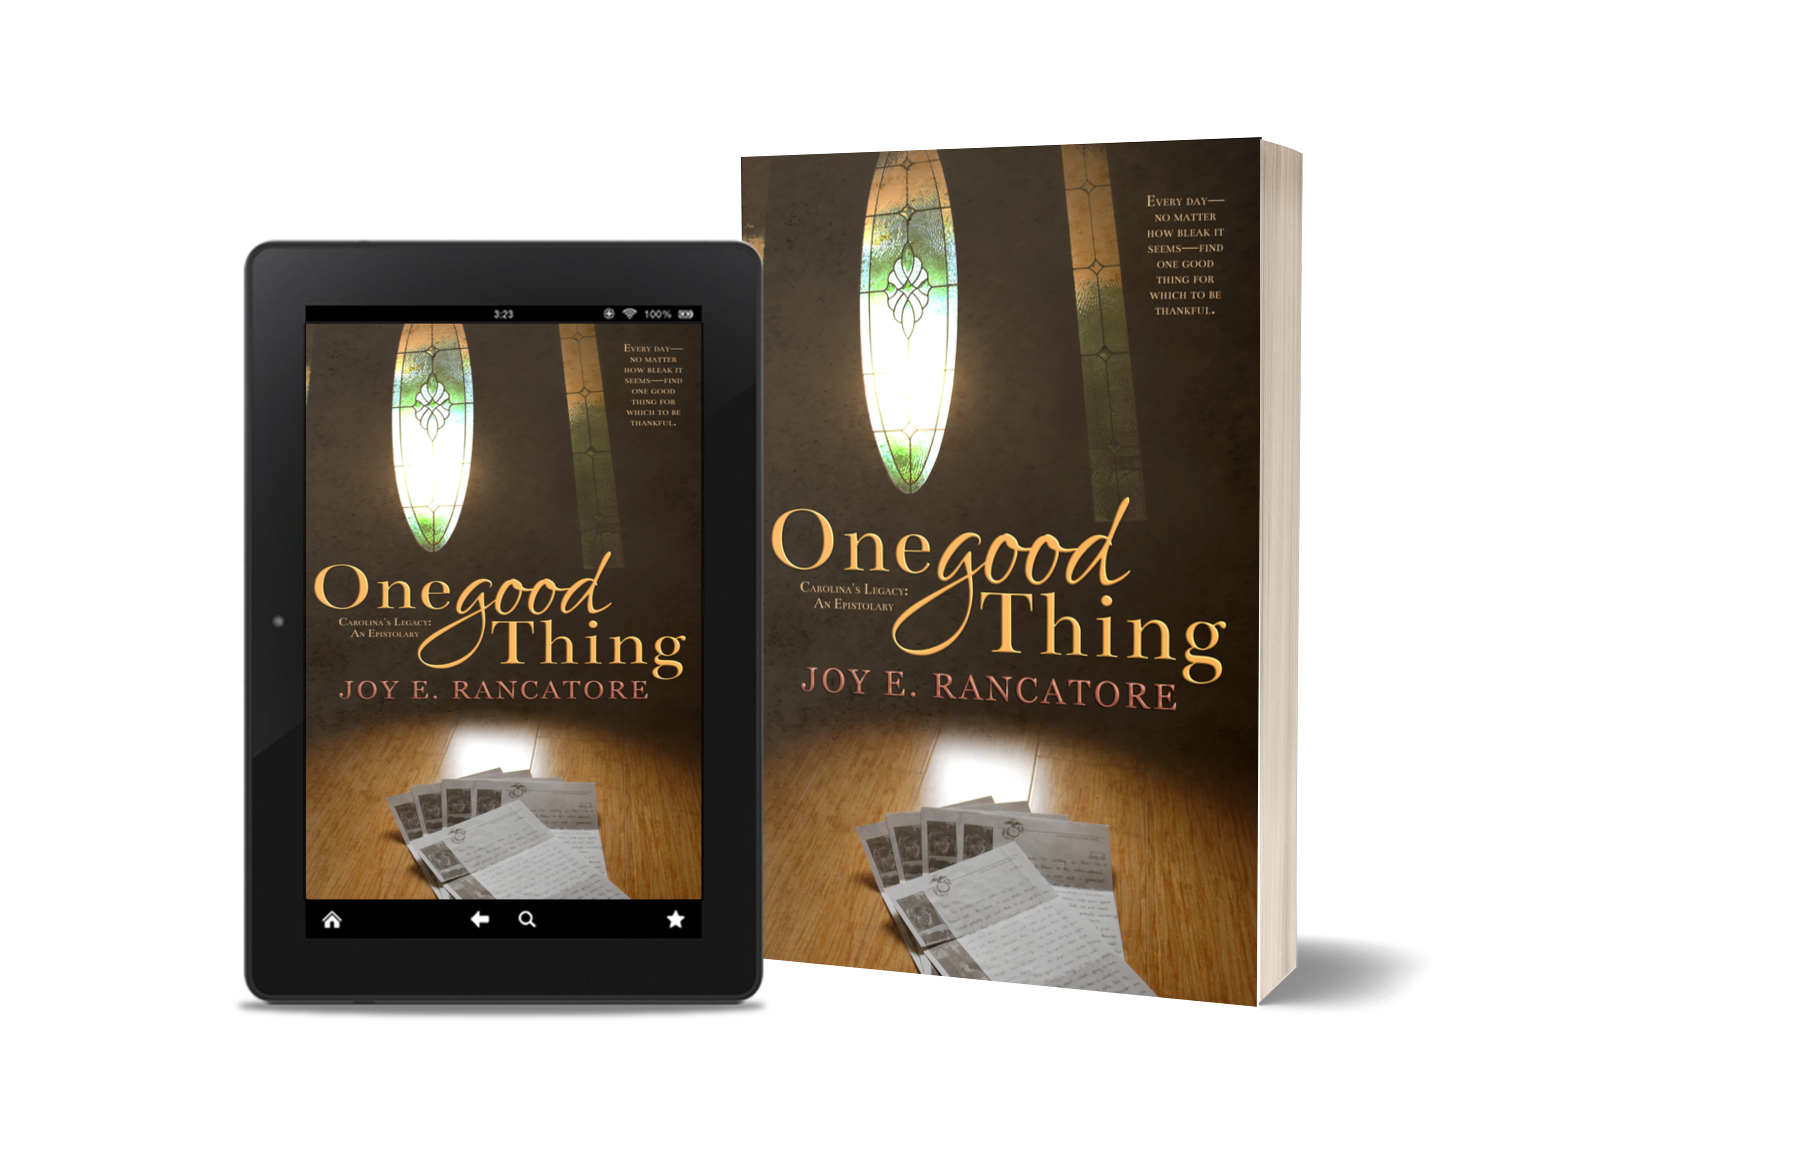 One Good Thing by Joy E. Rancatore, Southern fiction with Christian roots